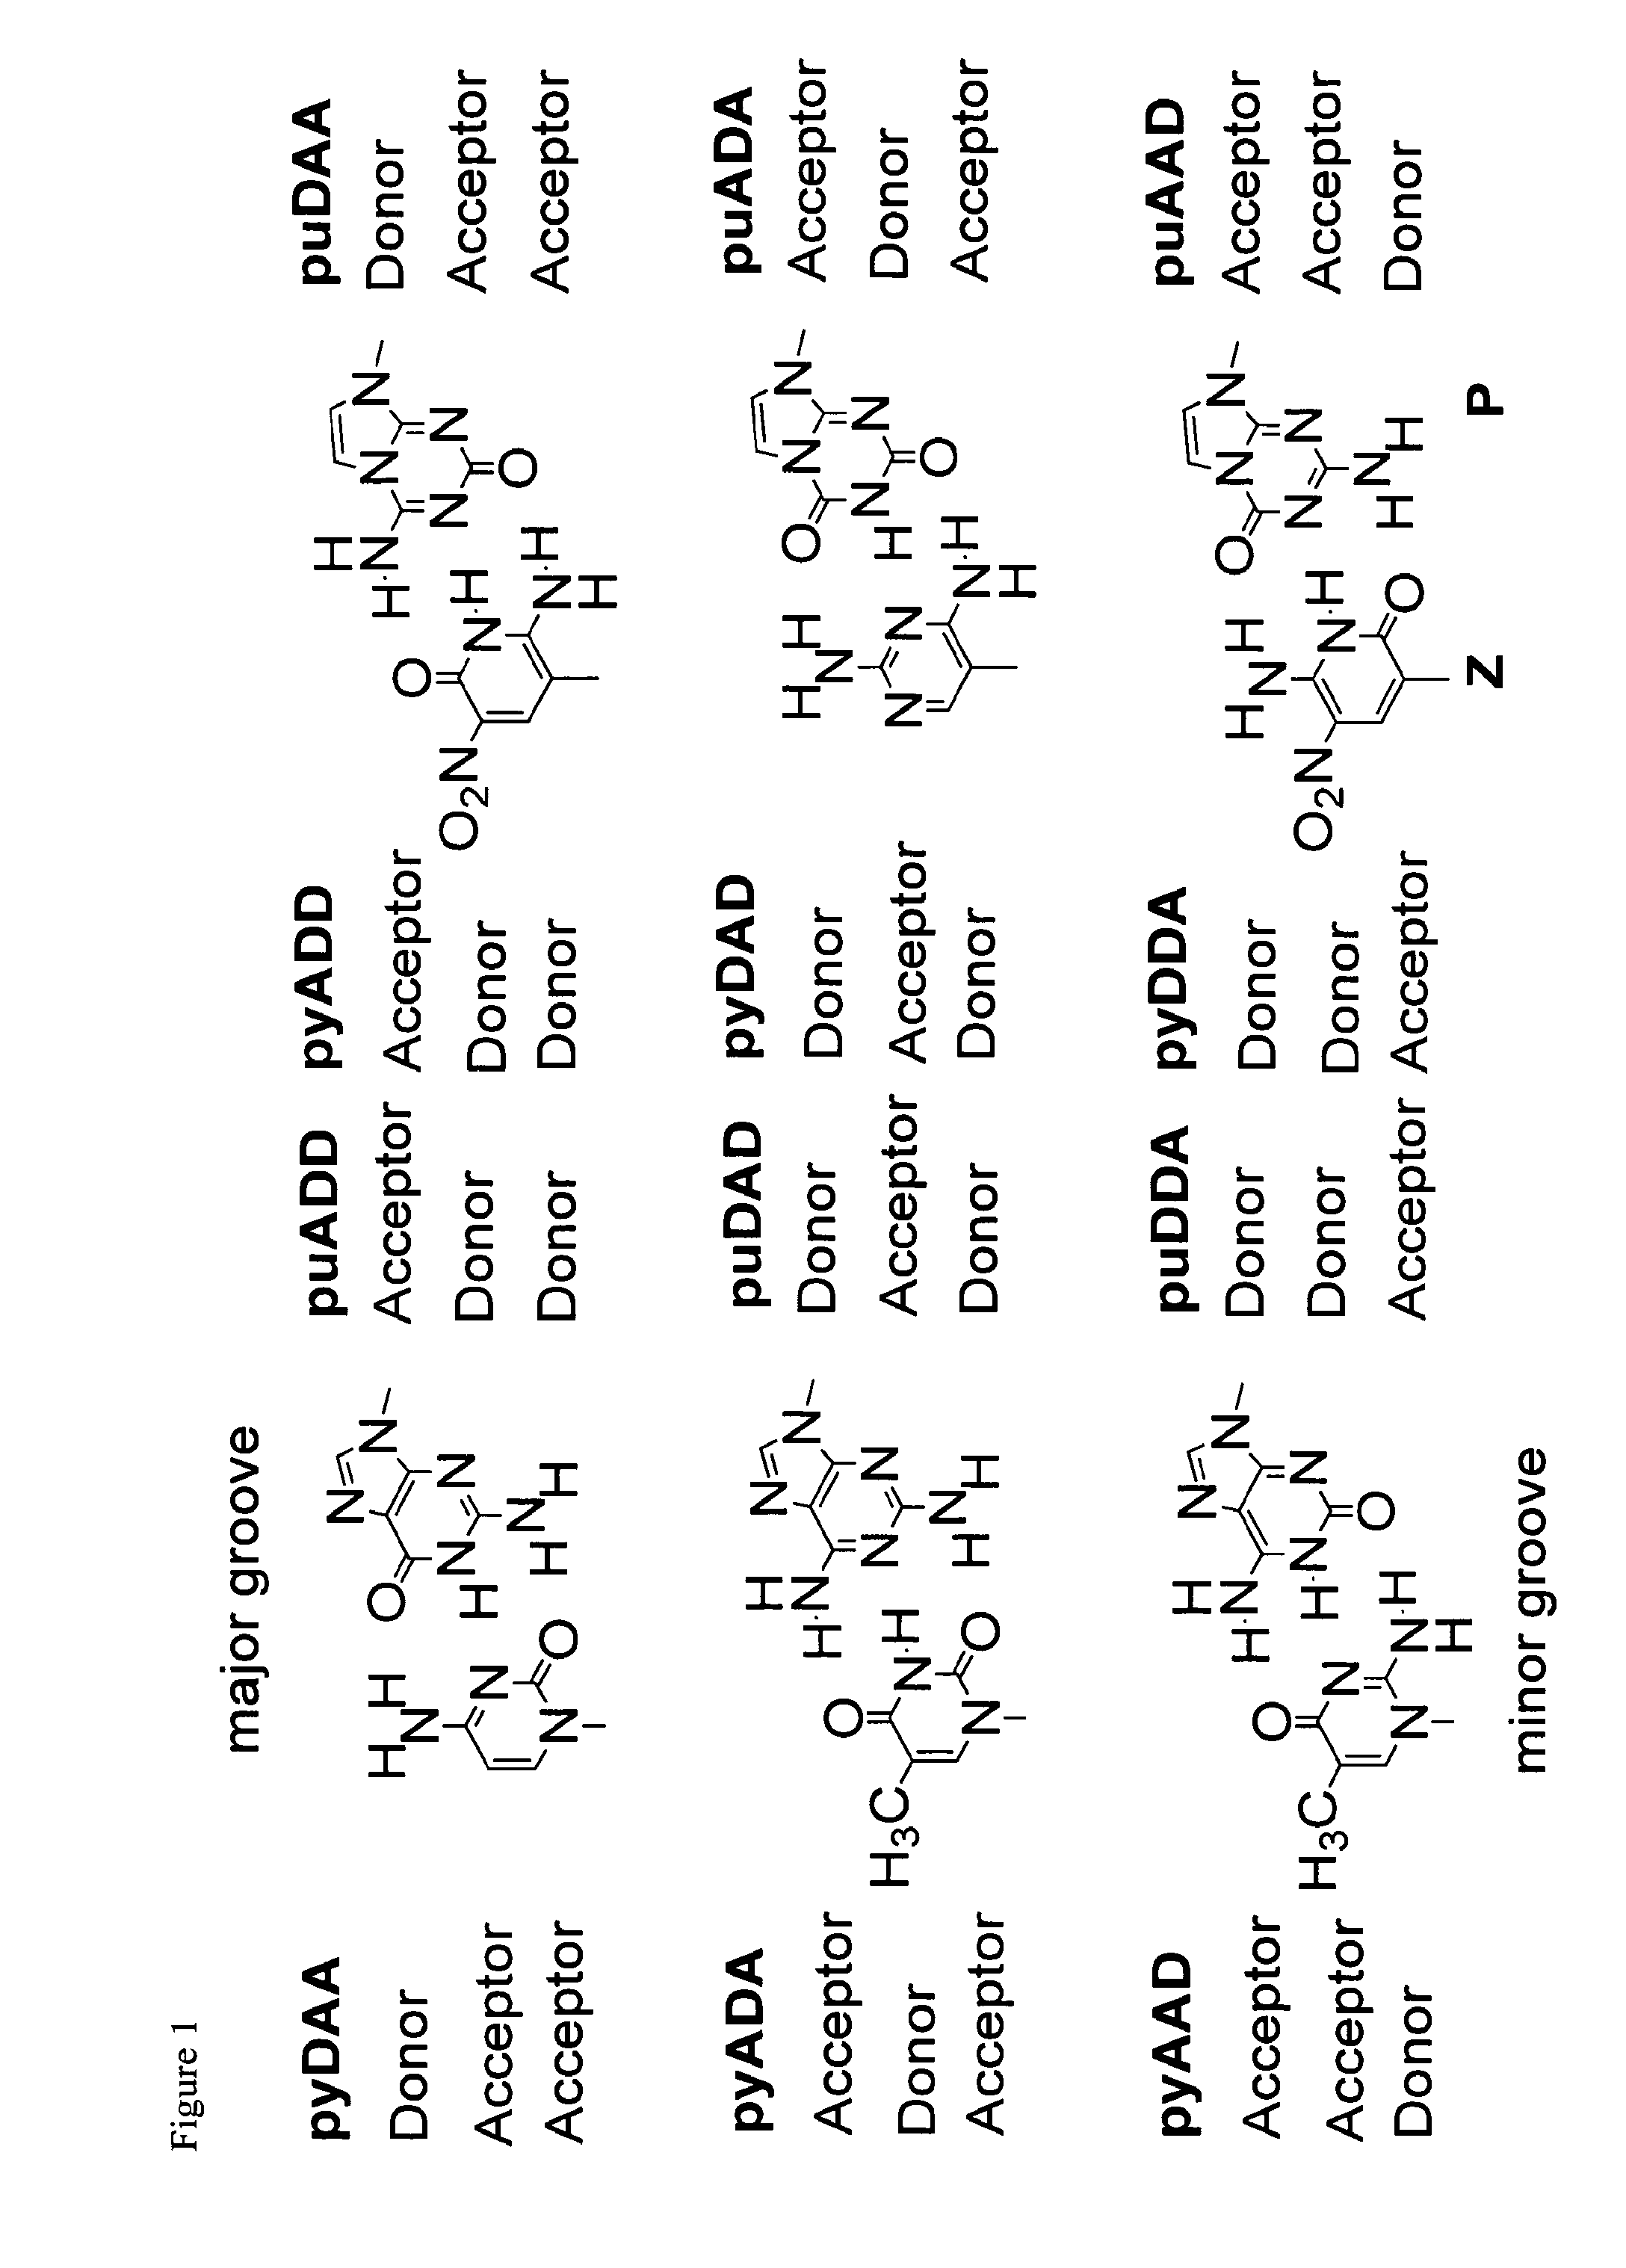 Polymerase incorporation of non-standard nucleotides